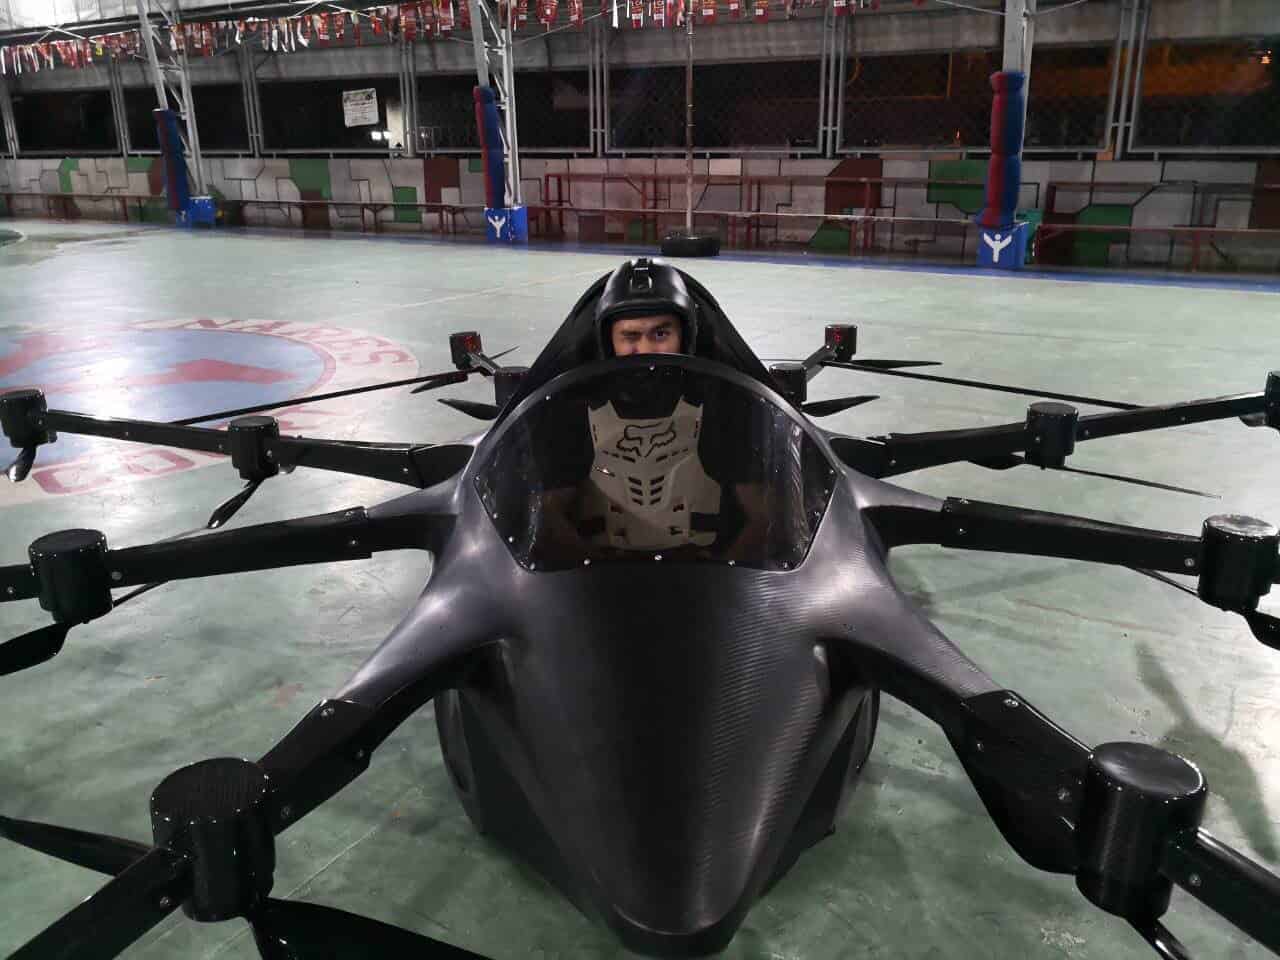 Single manned drone